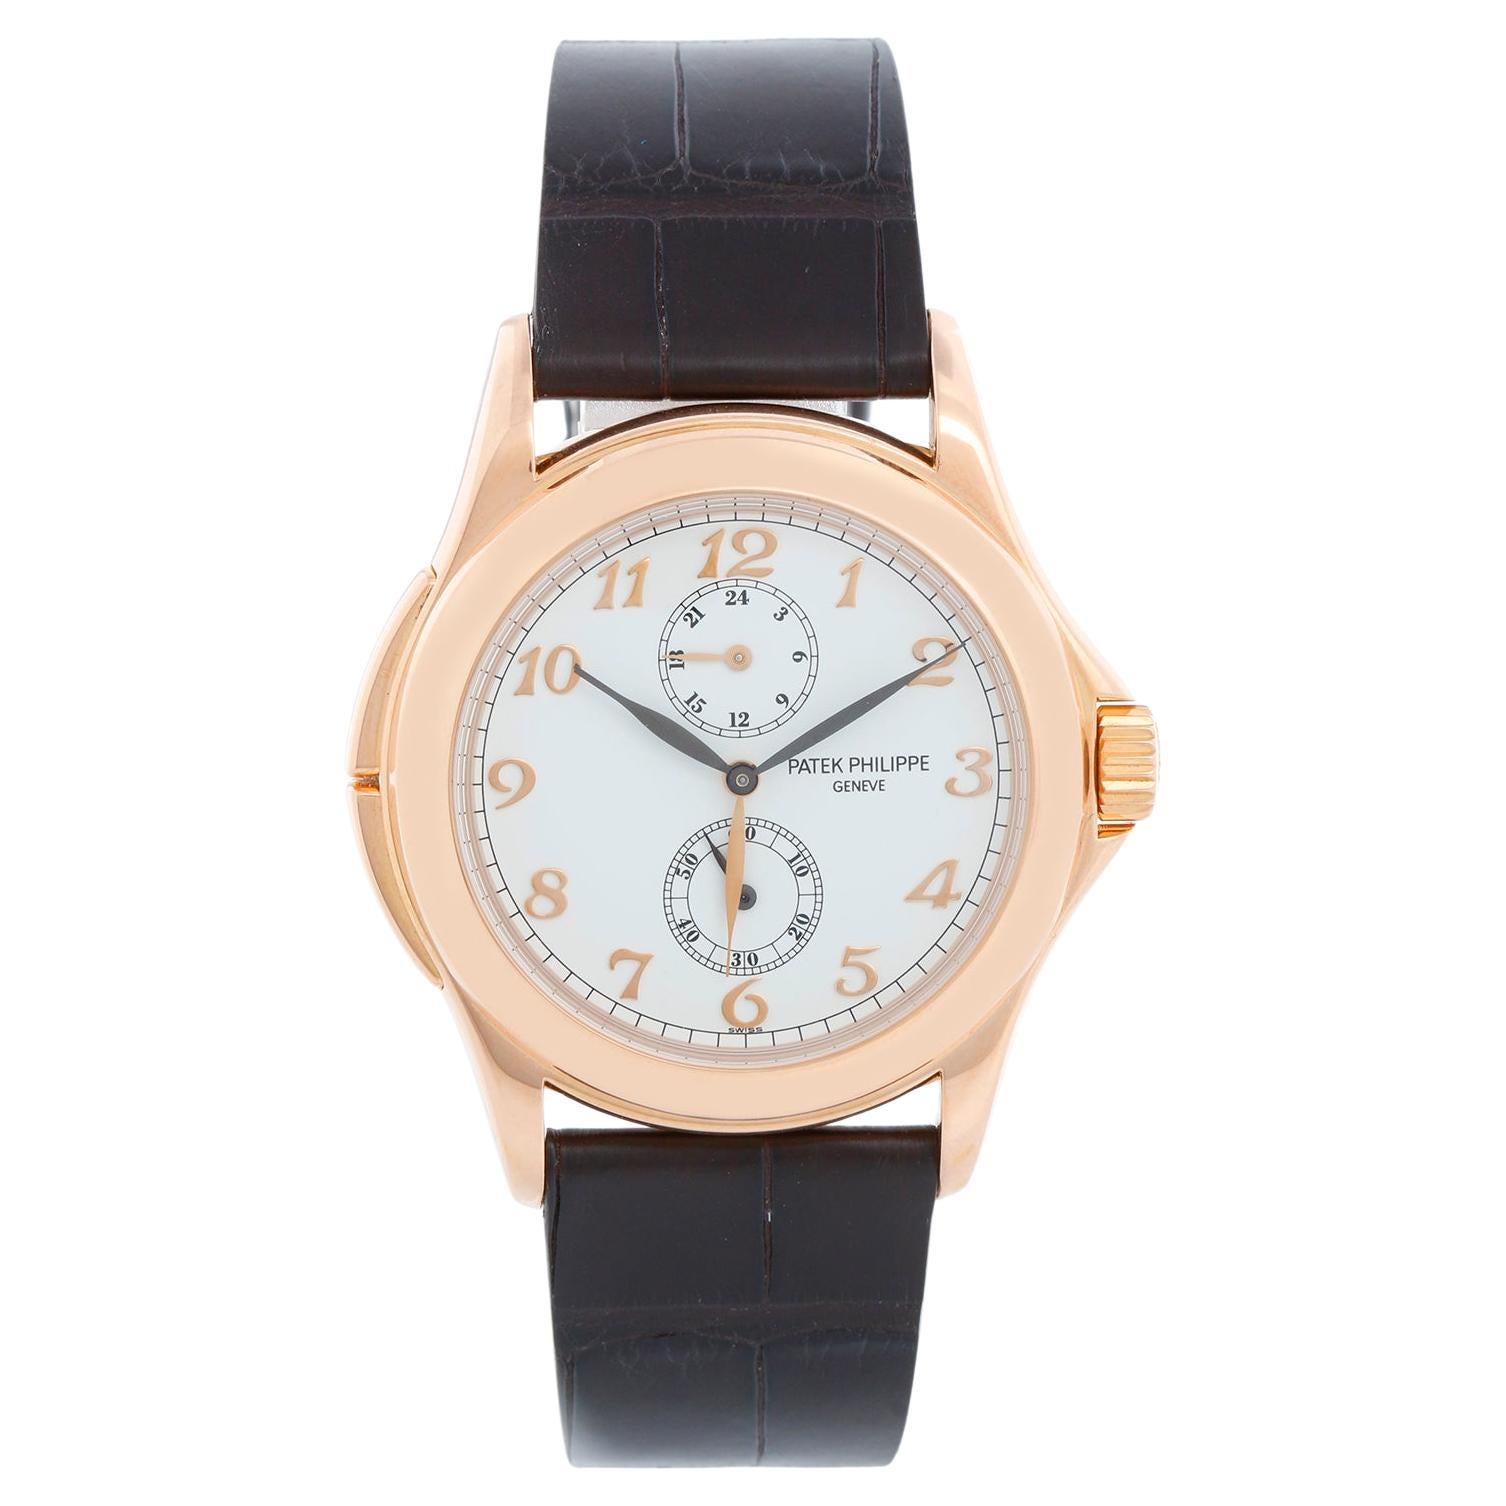 Collectible Patek Philippe Travel Time Men's 18k Rose Gold Watch 5134 R or 5134R For Sale